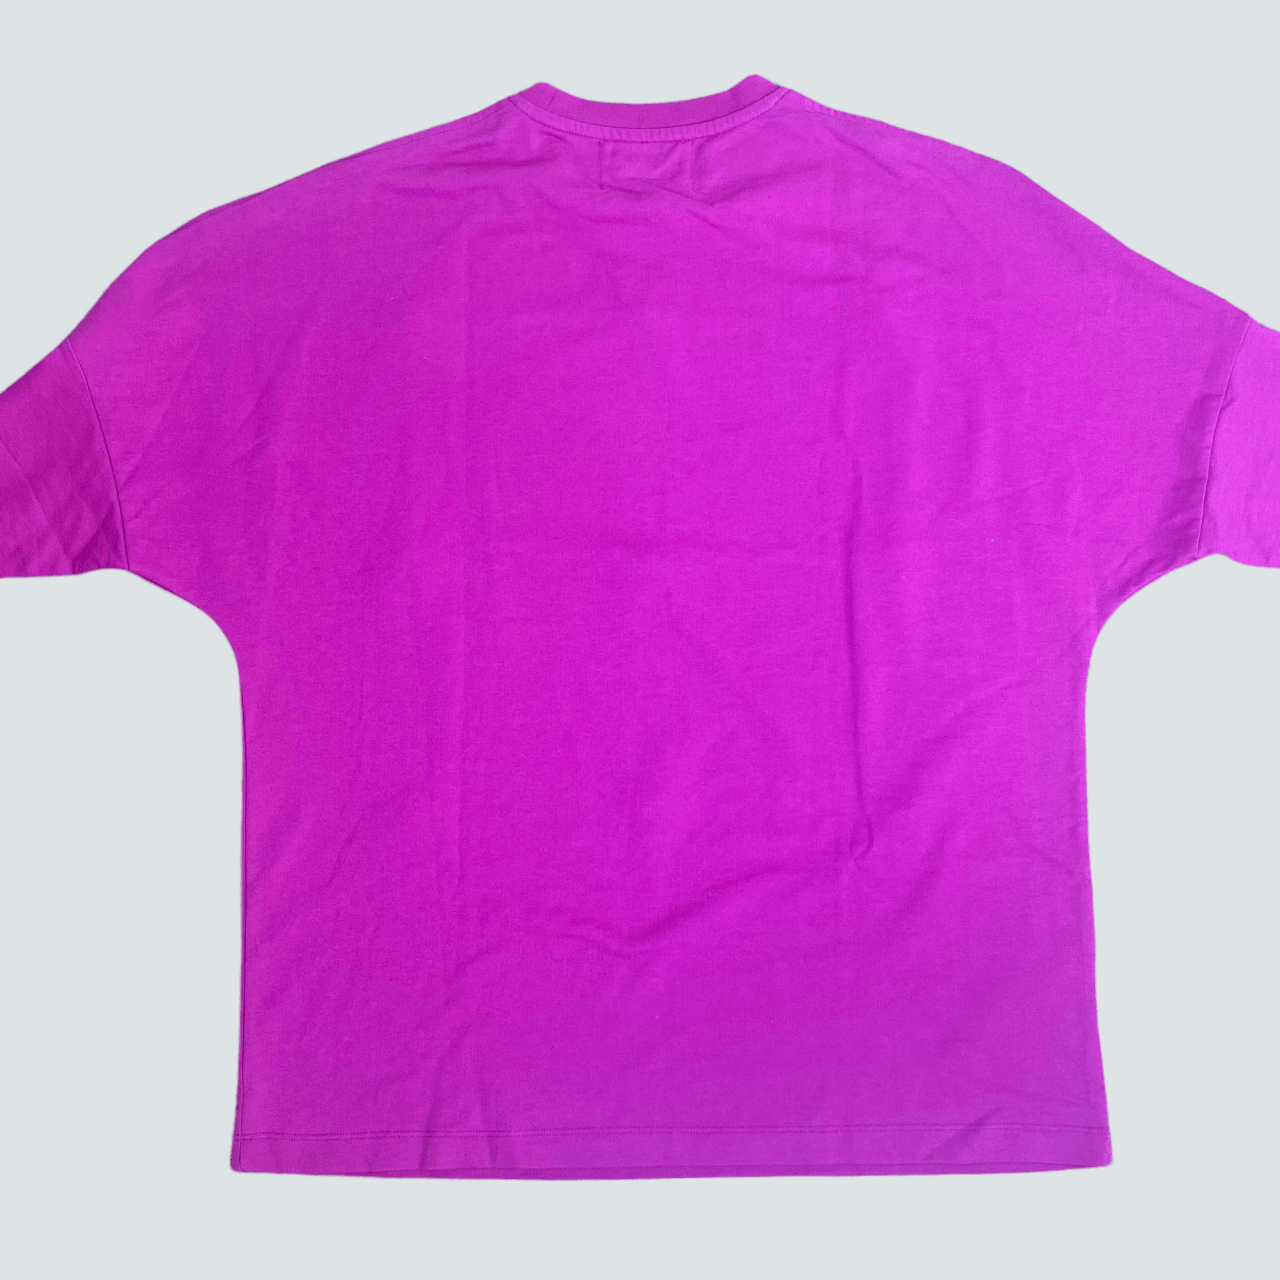 RAF SIMONS 19AW Fred Perry Pink Crewneck Long sleeve T-shirt (M) - Known Source